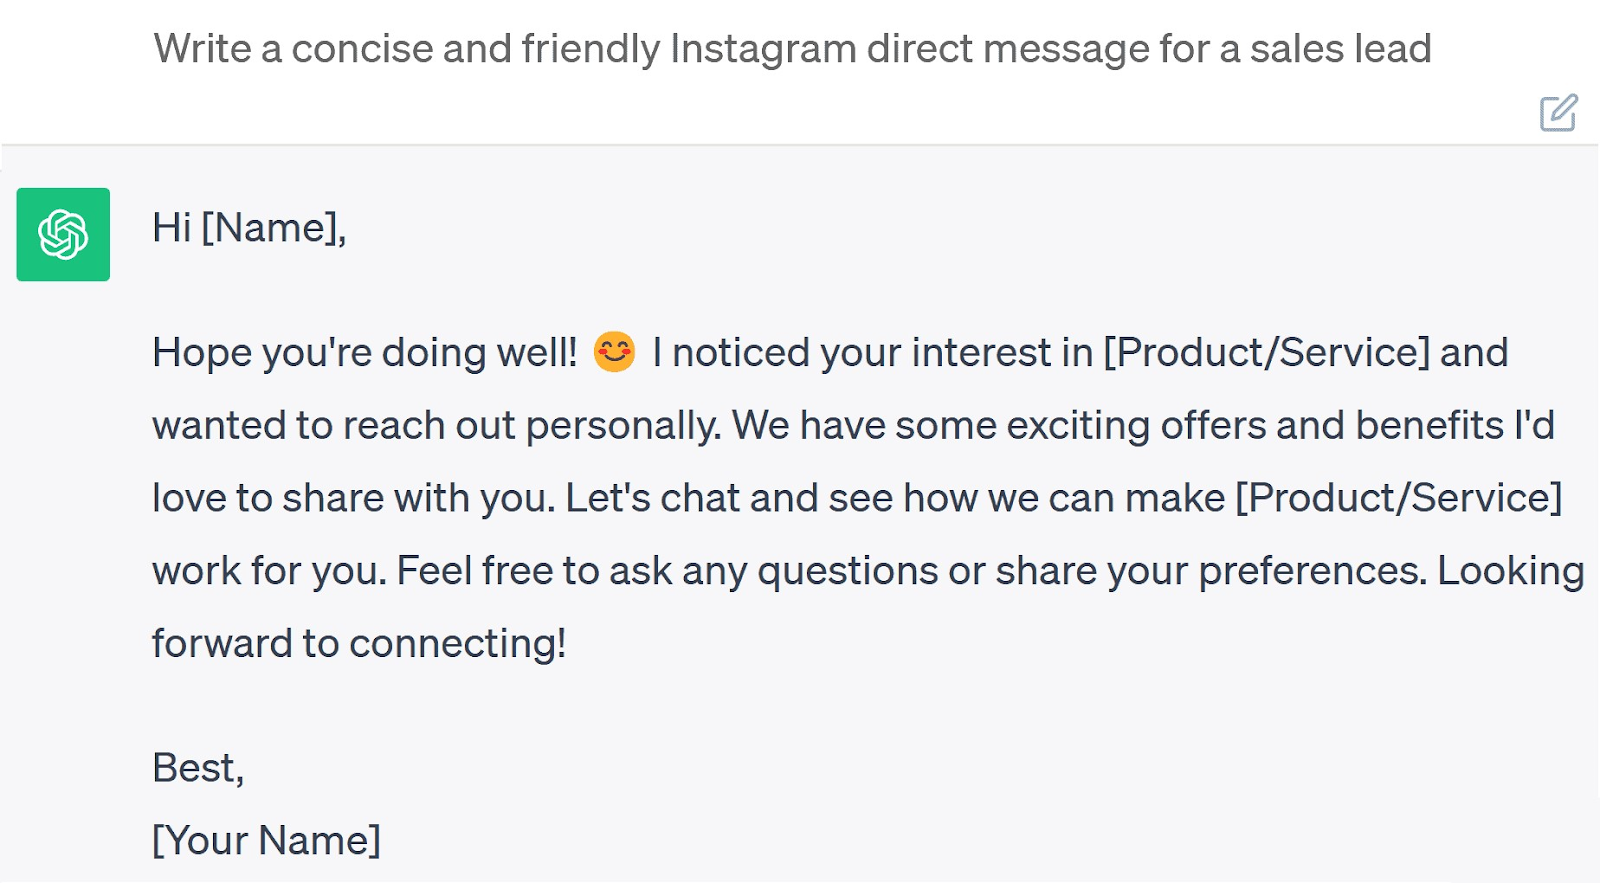 ChatGPT's response to “Write a concise and friendly Instagram direct message for a sales lead” query